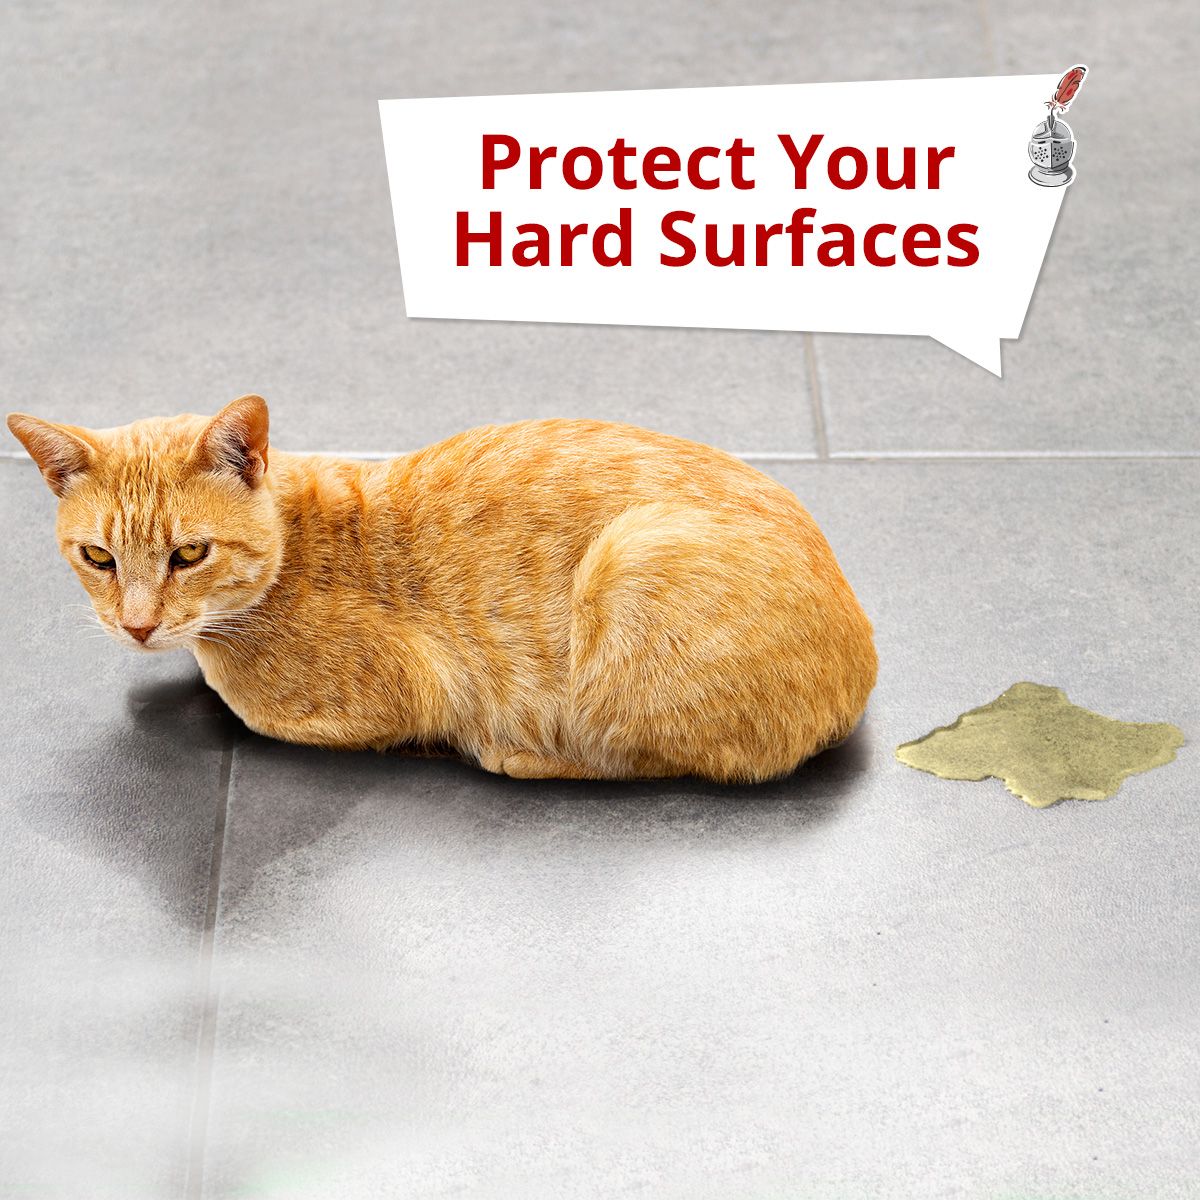 Keep Your Surfaces Looking Like-New!